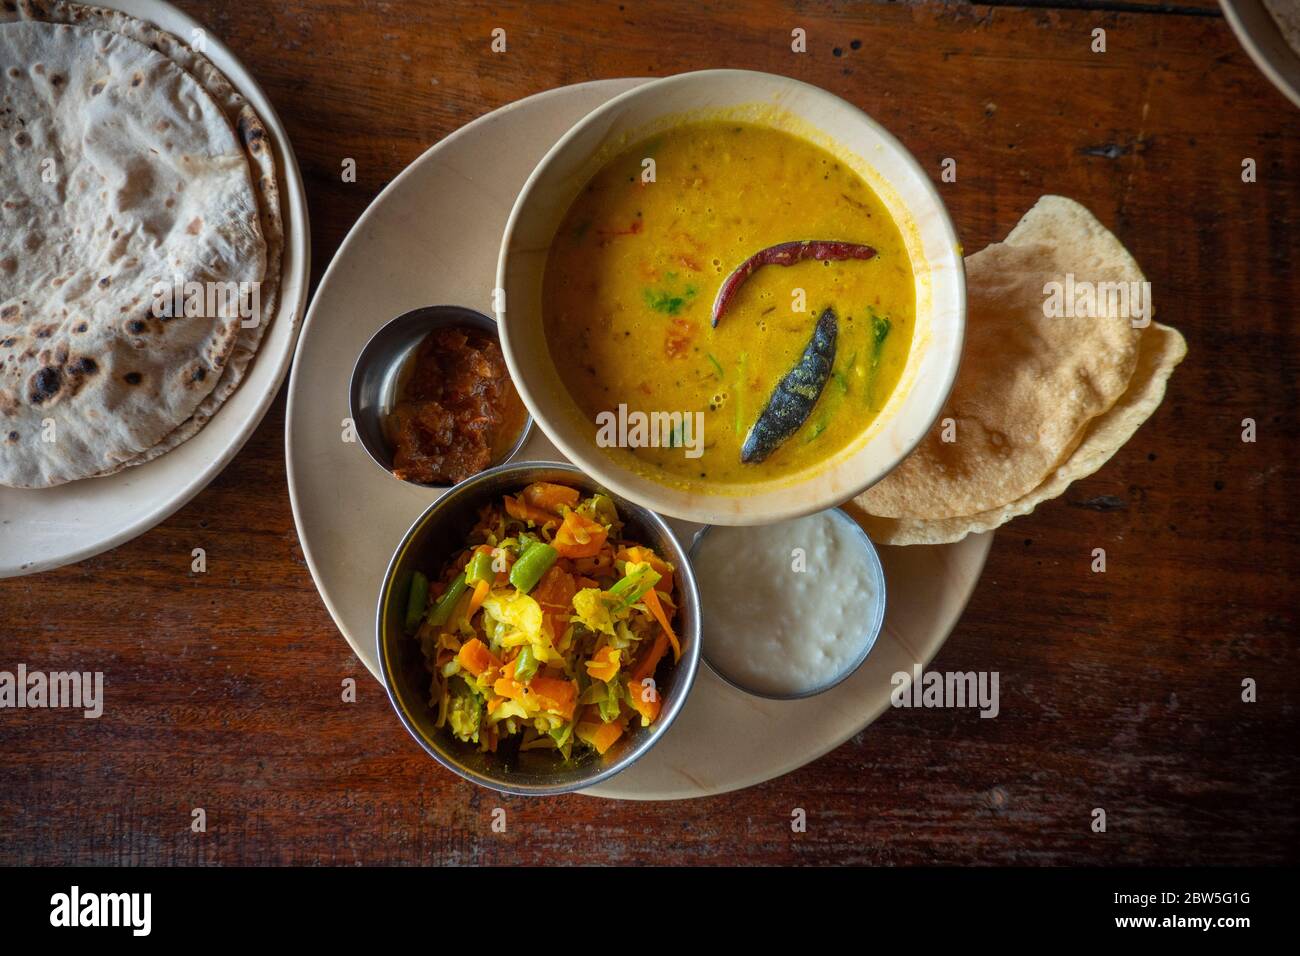 A yellow curry served with popadoms, vegetable salad and chapati at a restaurant in Mahabalipuram, India Stock Photo